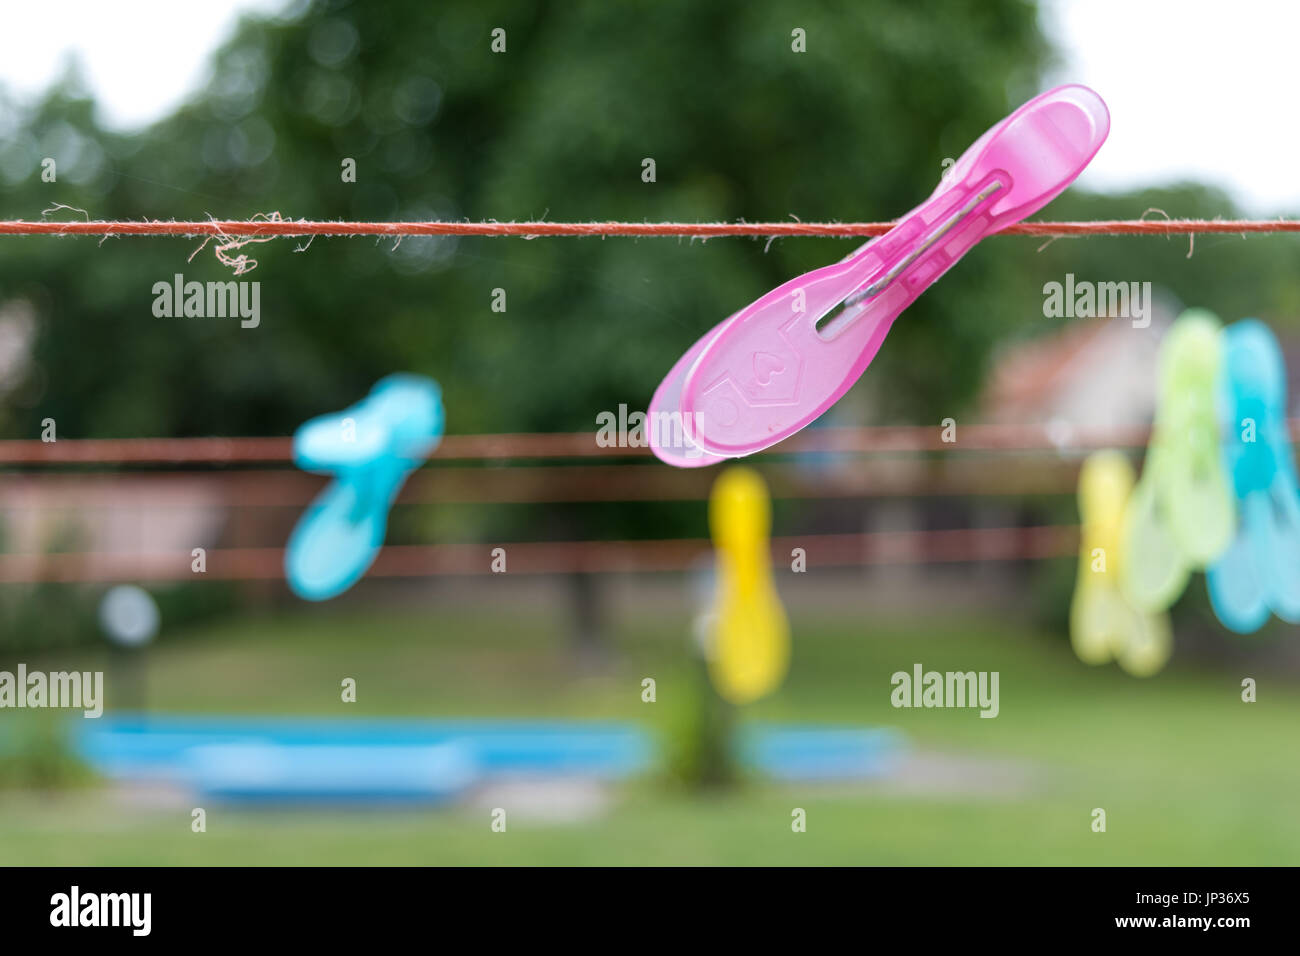 clothespins clipped on a strings, garden with pool in background Stock Photo